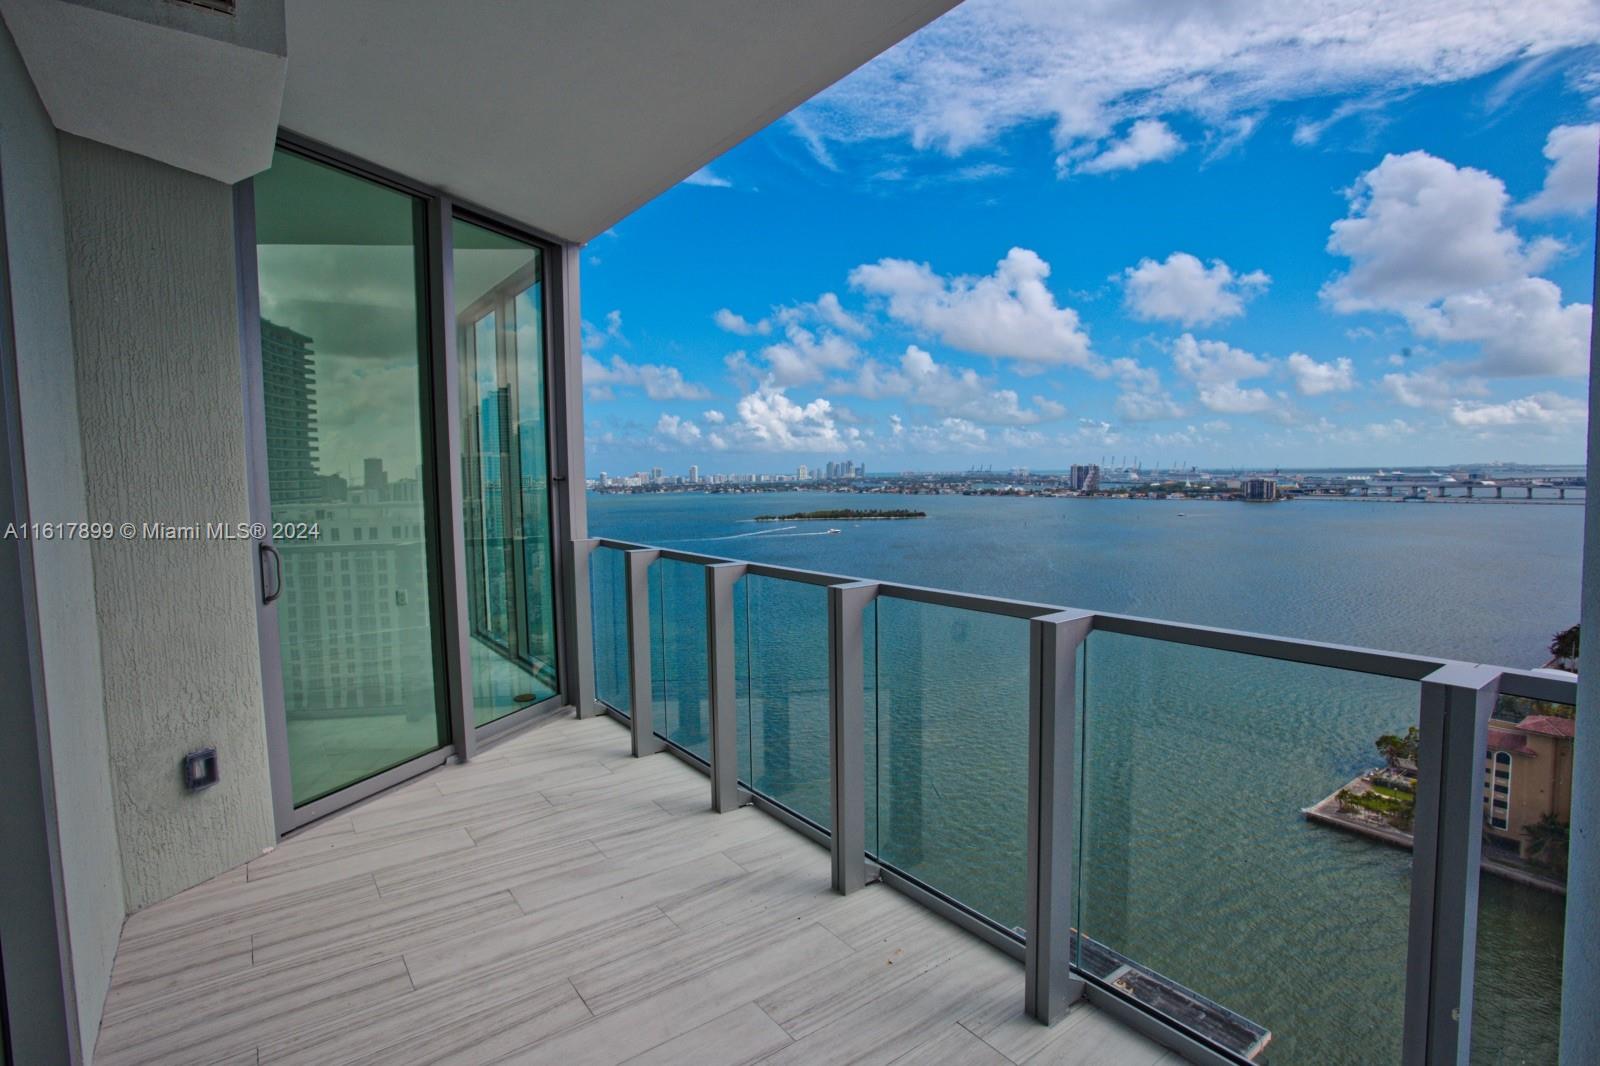 Enjoy this magnificent unit in the newest and most luxurious building in East Edgewater. 1 bedroom + spacious den,2 bathrooms. Private elevator, walk-in closets, top of the line appliances, window treatments, incredible Bay views from every room. Biscayne Beach's interiors were designed by renowned Bravo star and design expert Thom Filicia. Luxury amenities including 2 pools, cabanas, beach club, state of the art gym, tennis courts and spa.